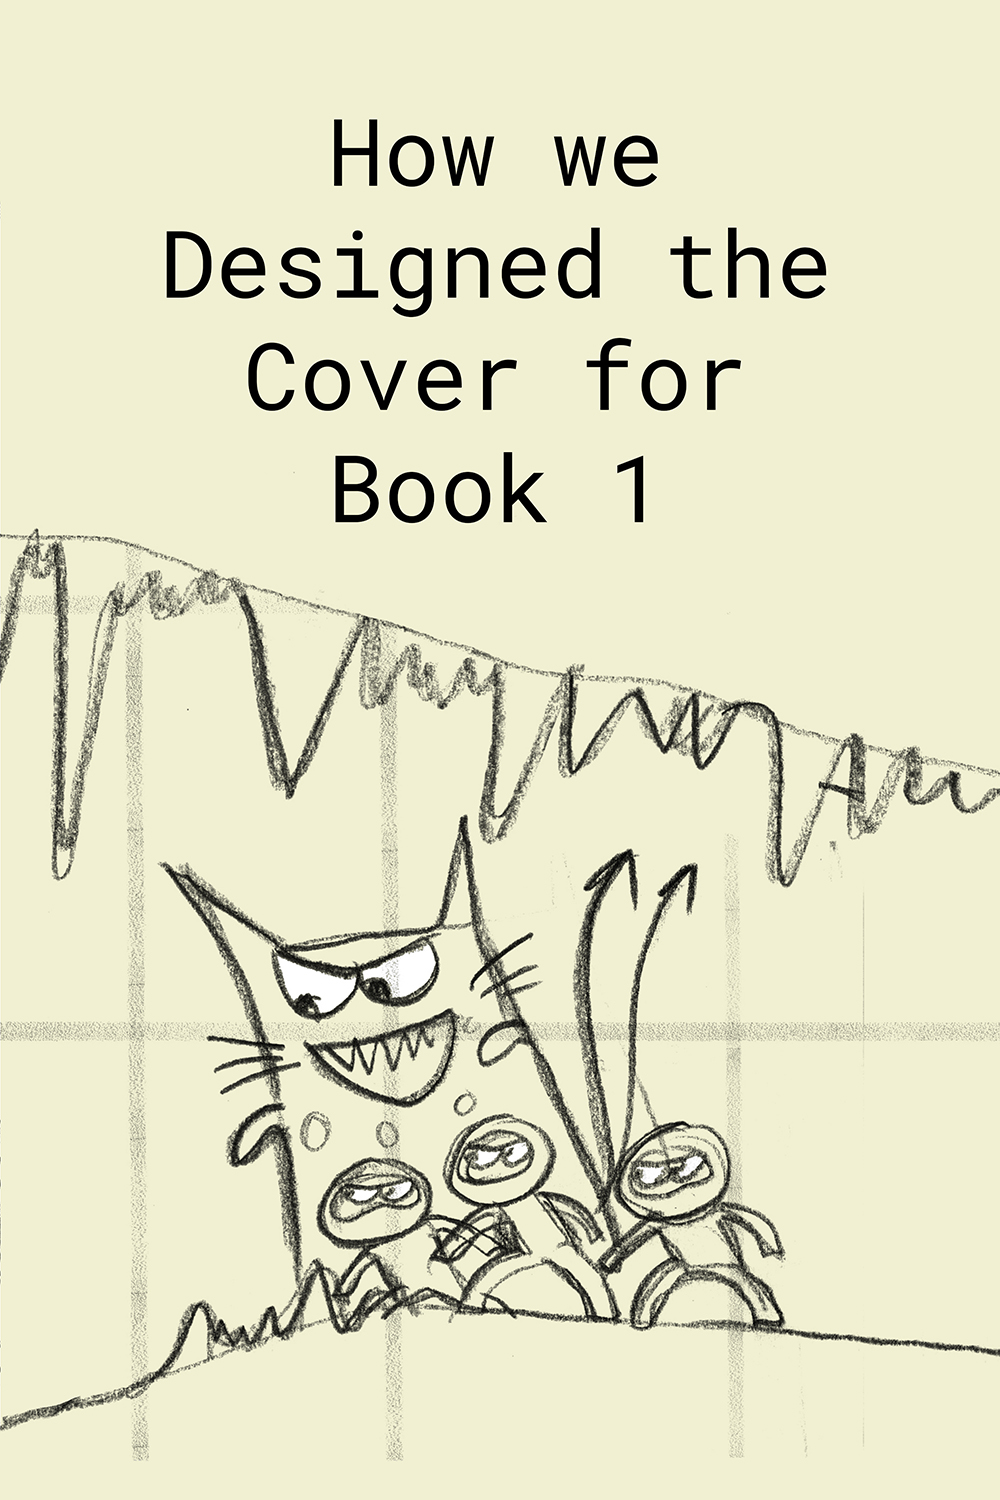 Designing the cover for Book 1